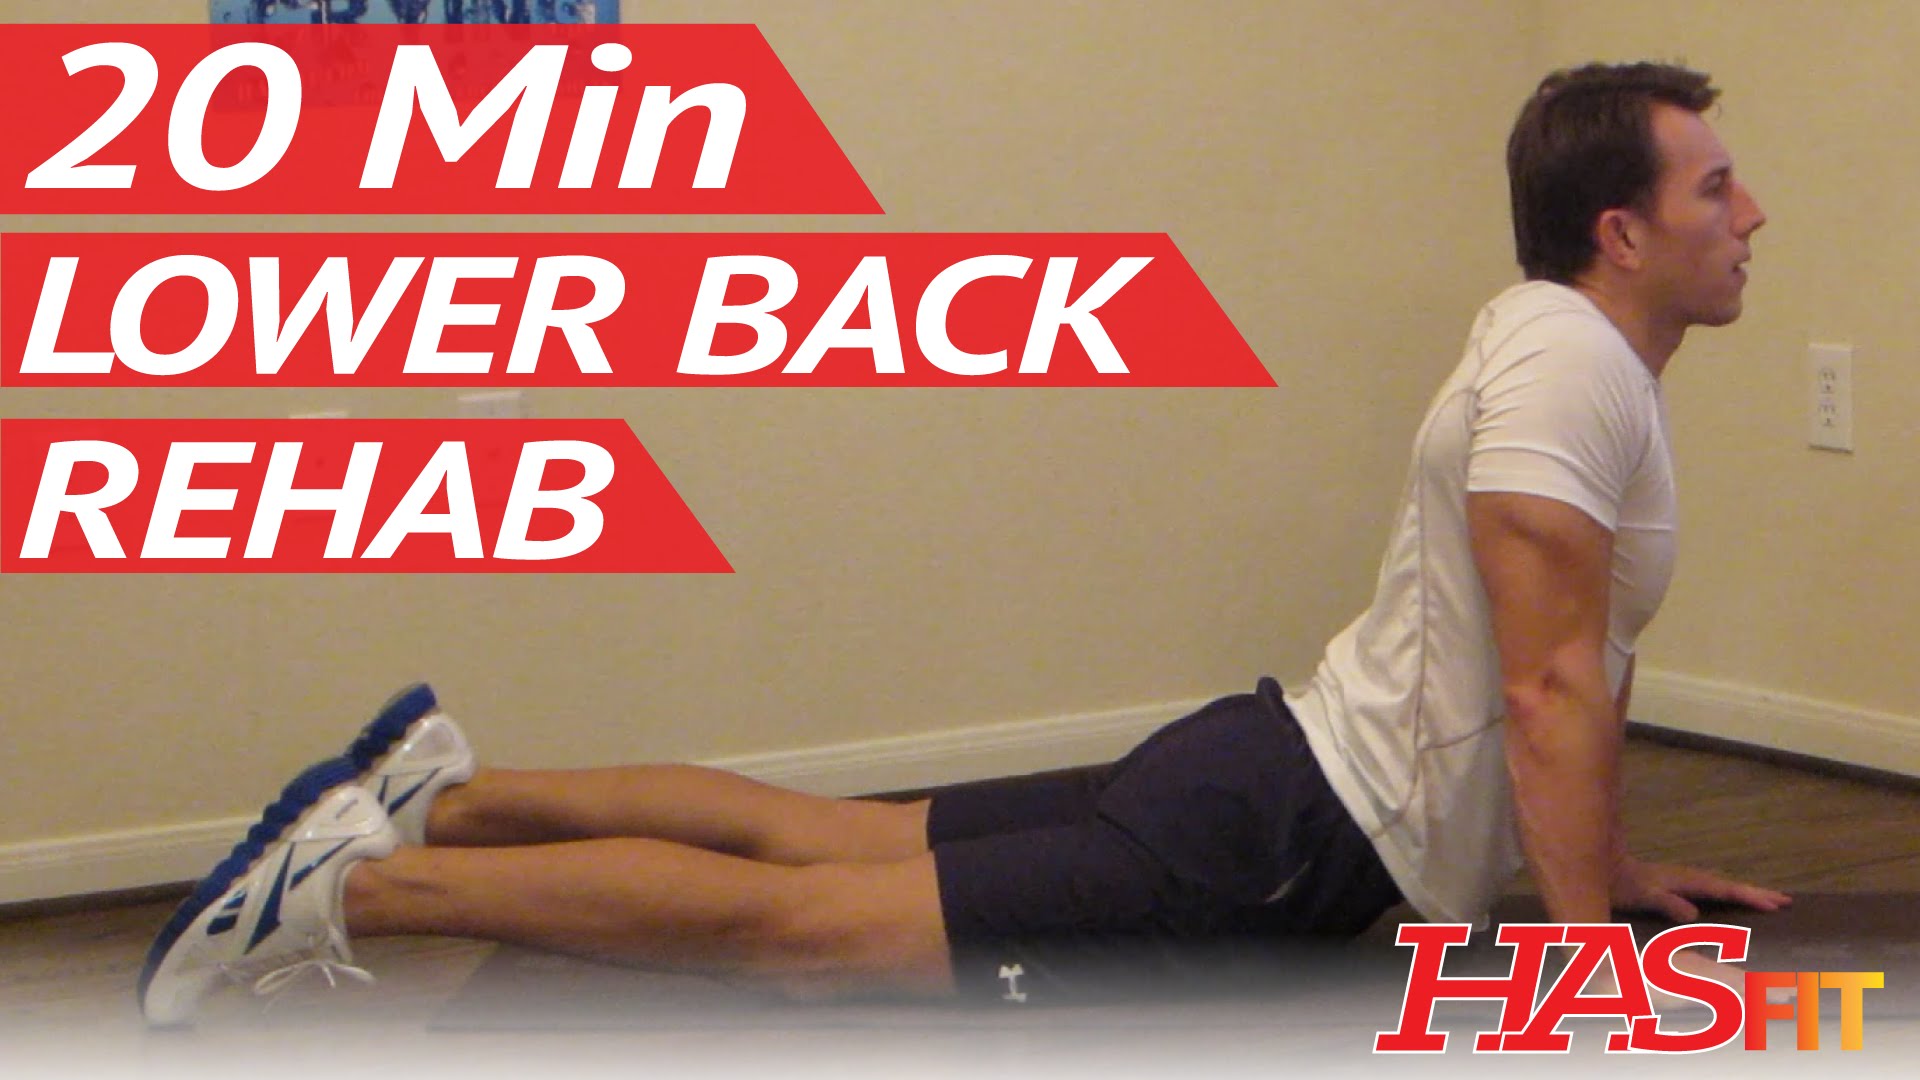 20 Min Lower Back Rehab – Lower Back Stretches for Lower Back Pain Exercises Workouts – Low Back